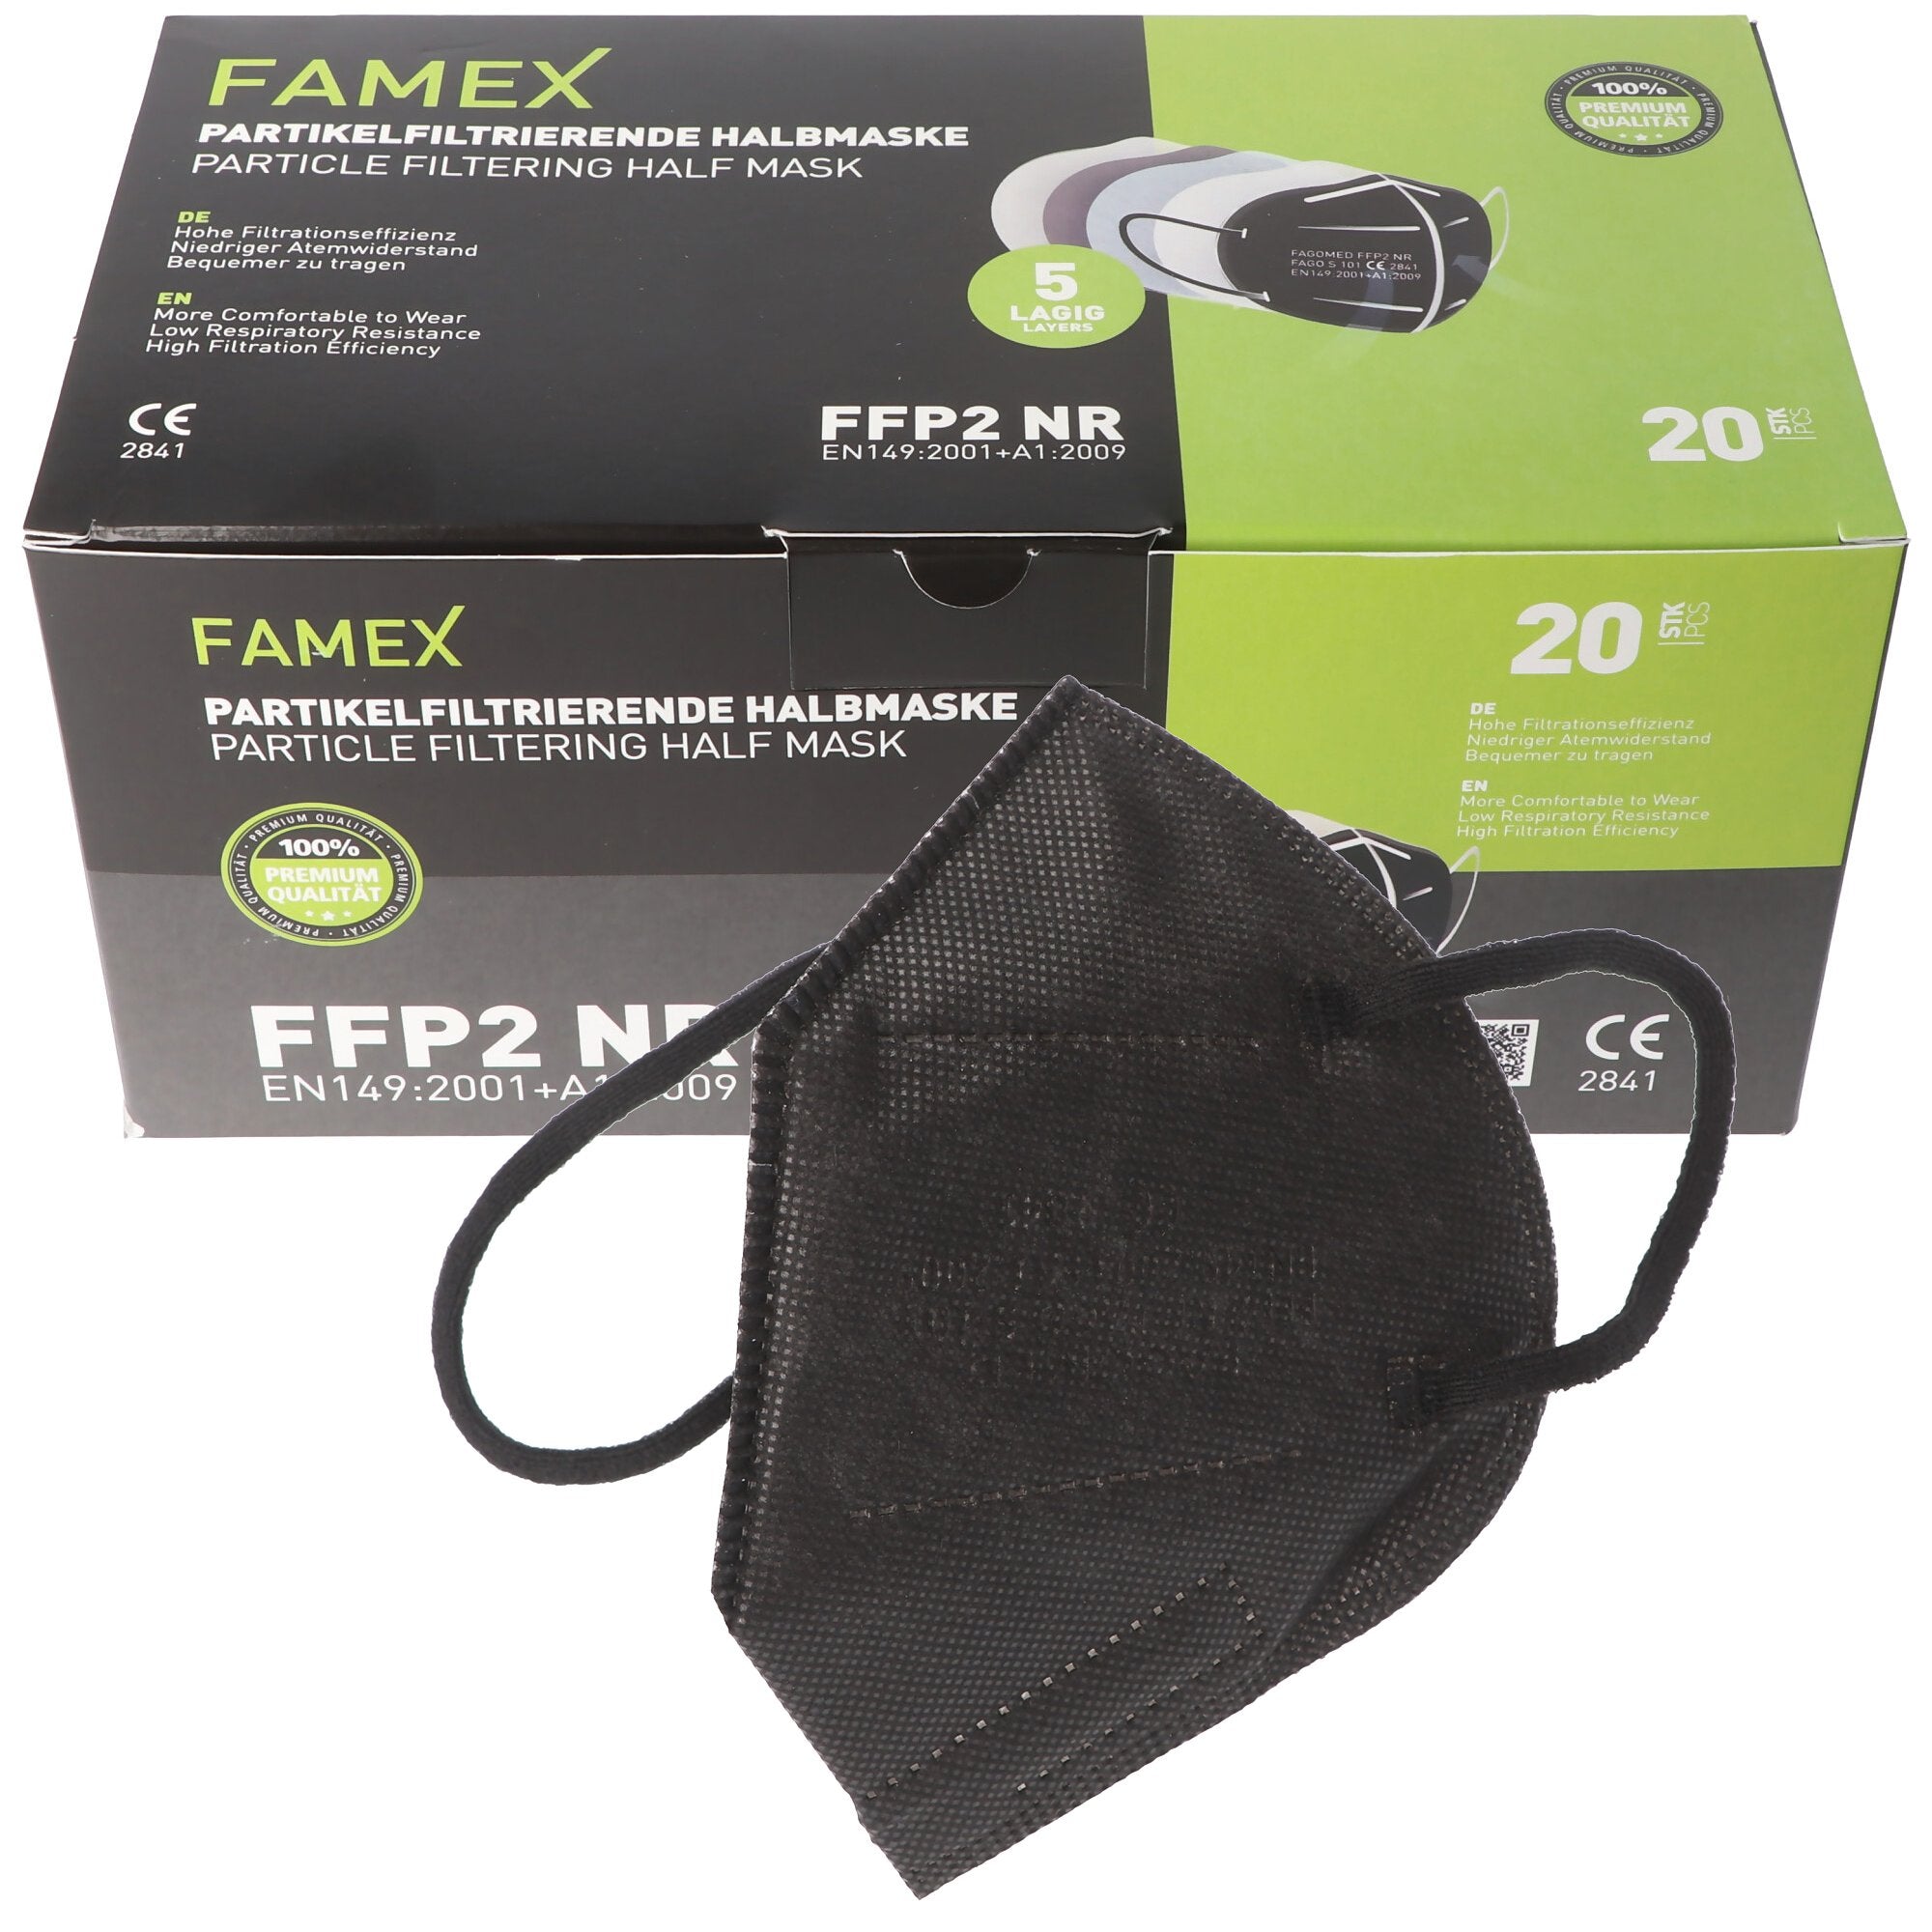 20 pieces FFP2 mask black 5-layer, certified according to DIN EN149: 2001 + A1: 2009, particle filte